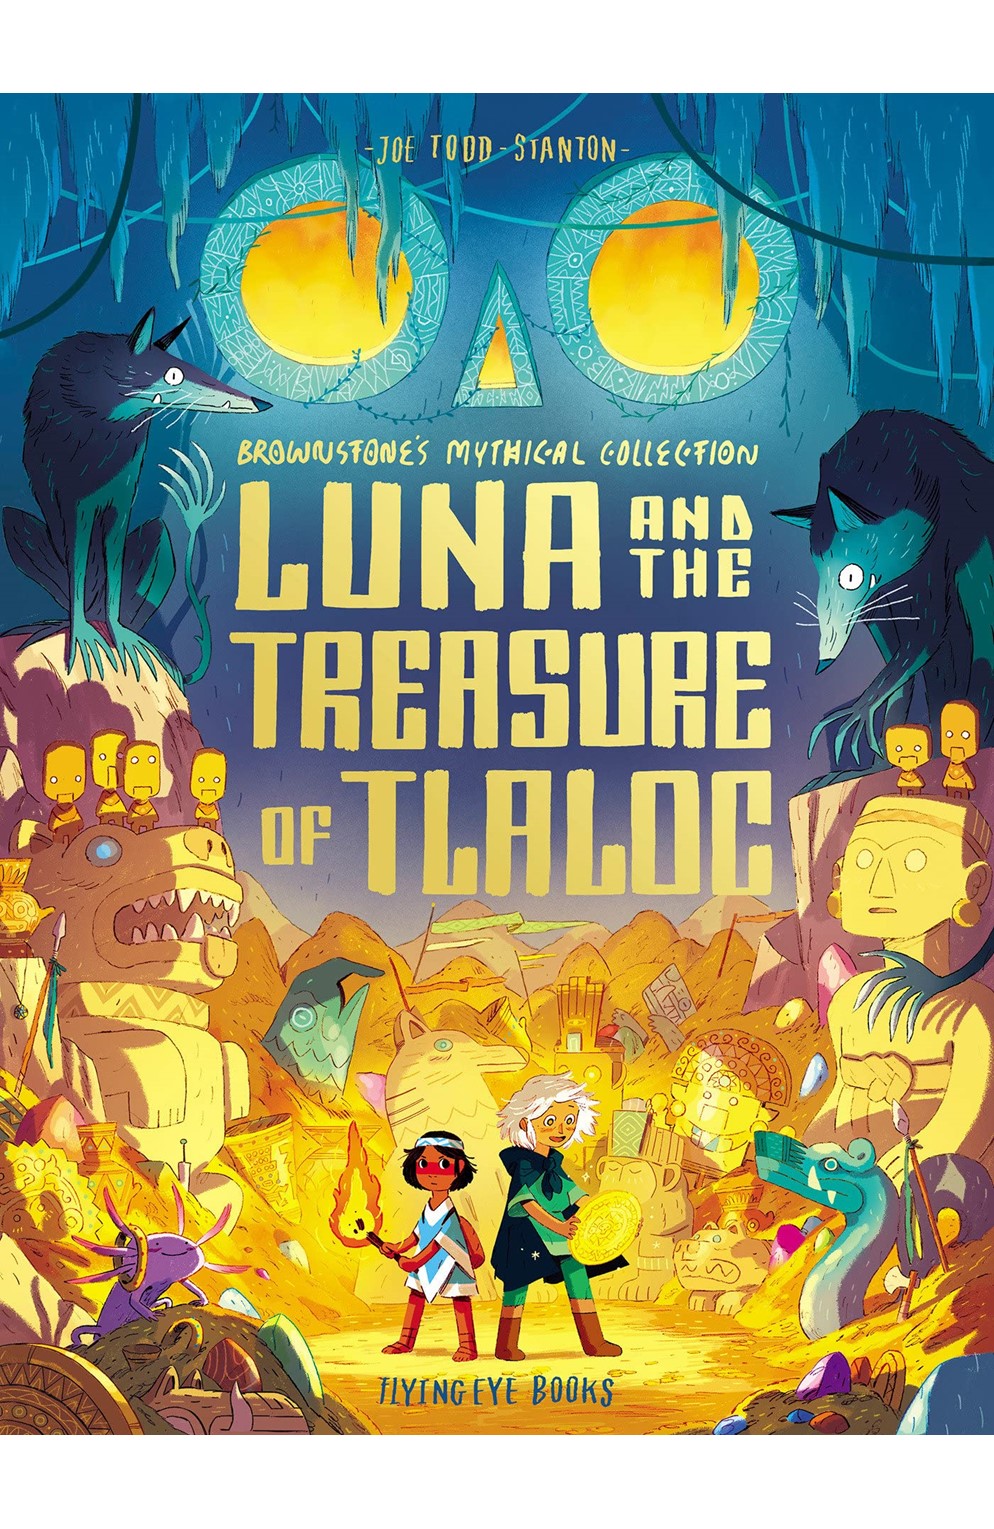 Brownstone's Mythical Collection Volume 5 Luna And The Treasure of Tlaloc